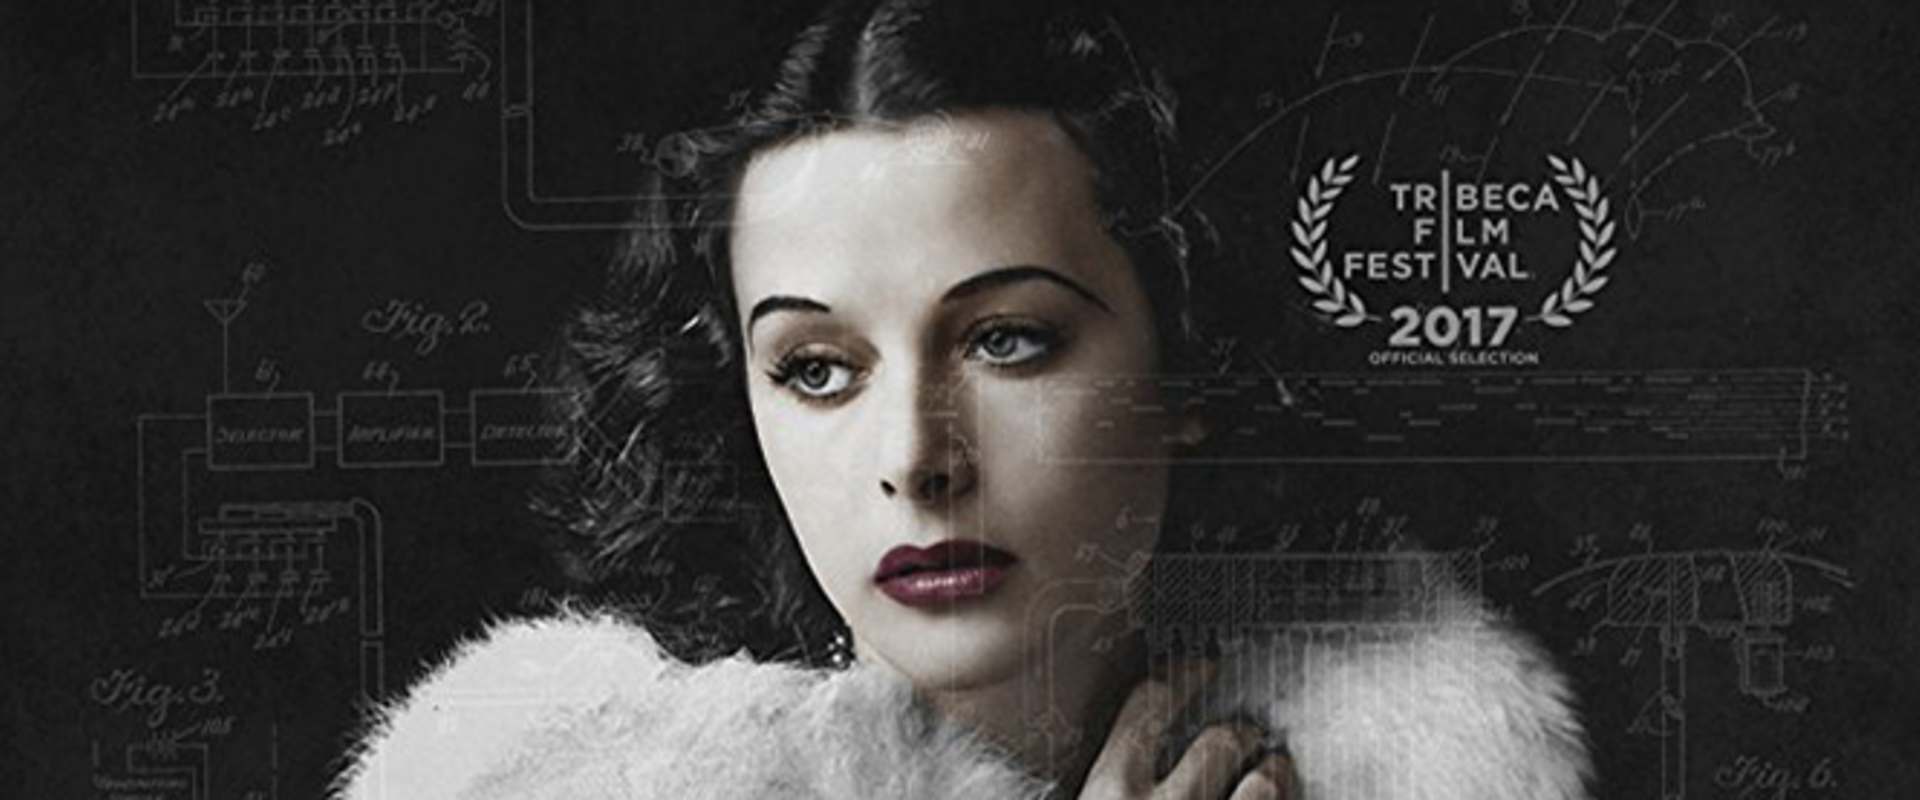 Bombshell: The Hedy Lamarr Story background 2